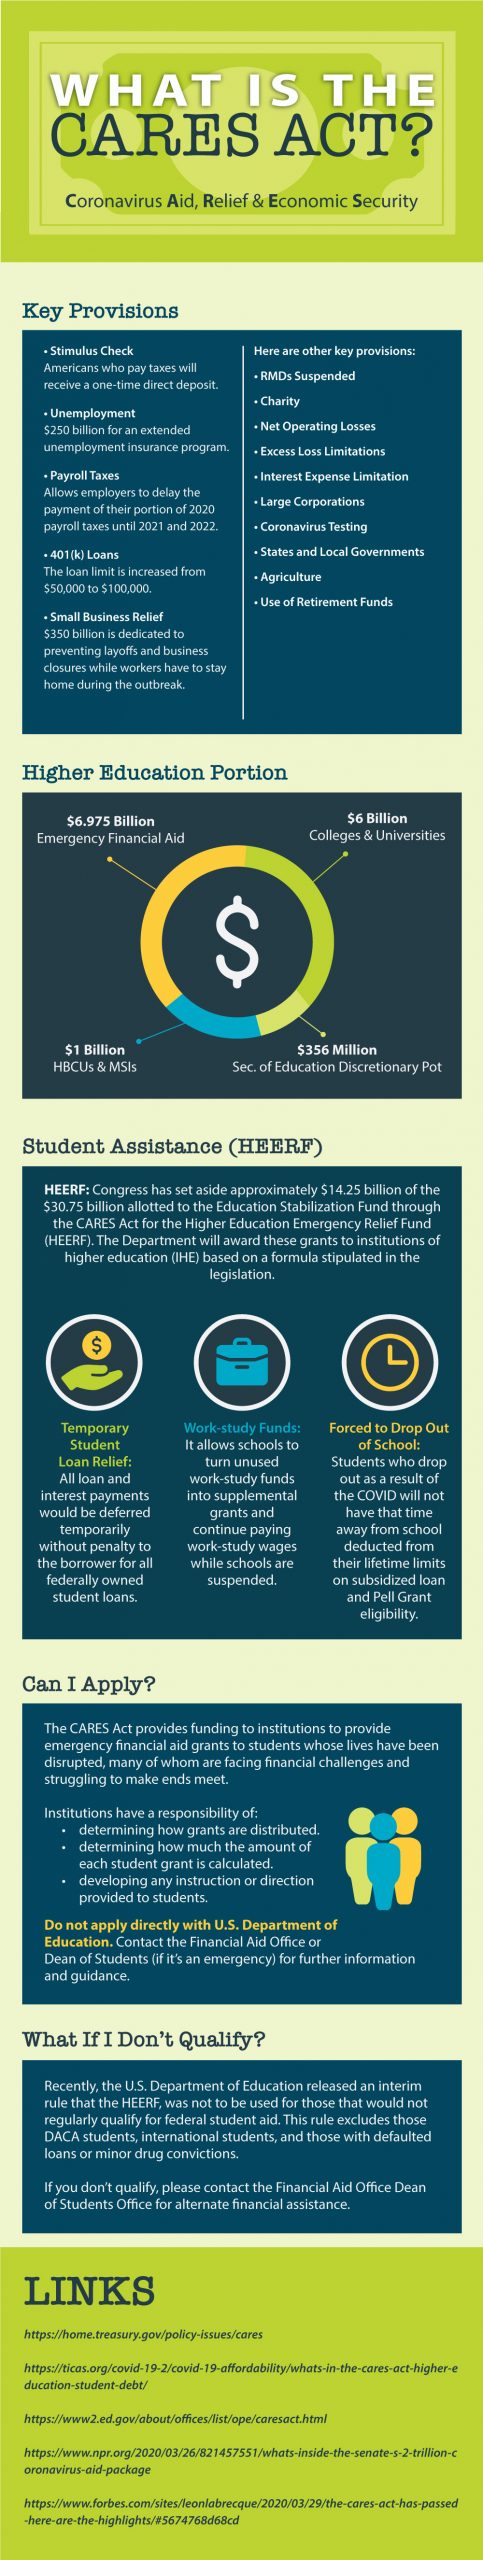 INFOGRAPHIC: How the CARES Act affects higher education – UHCL The Signal